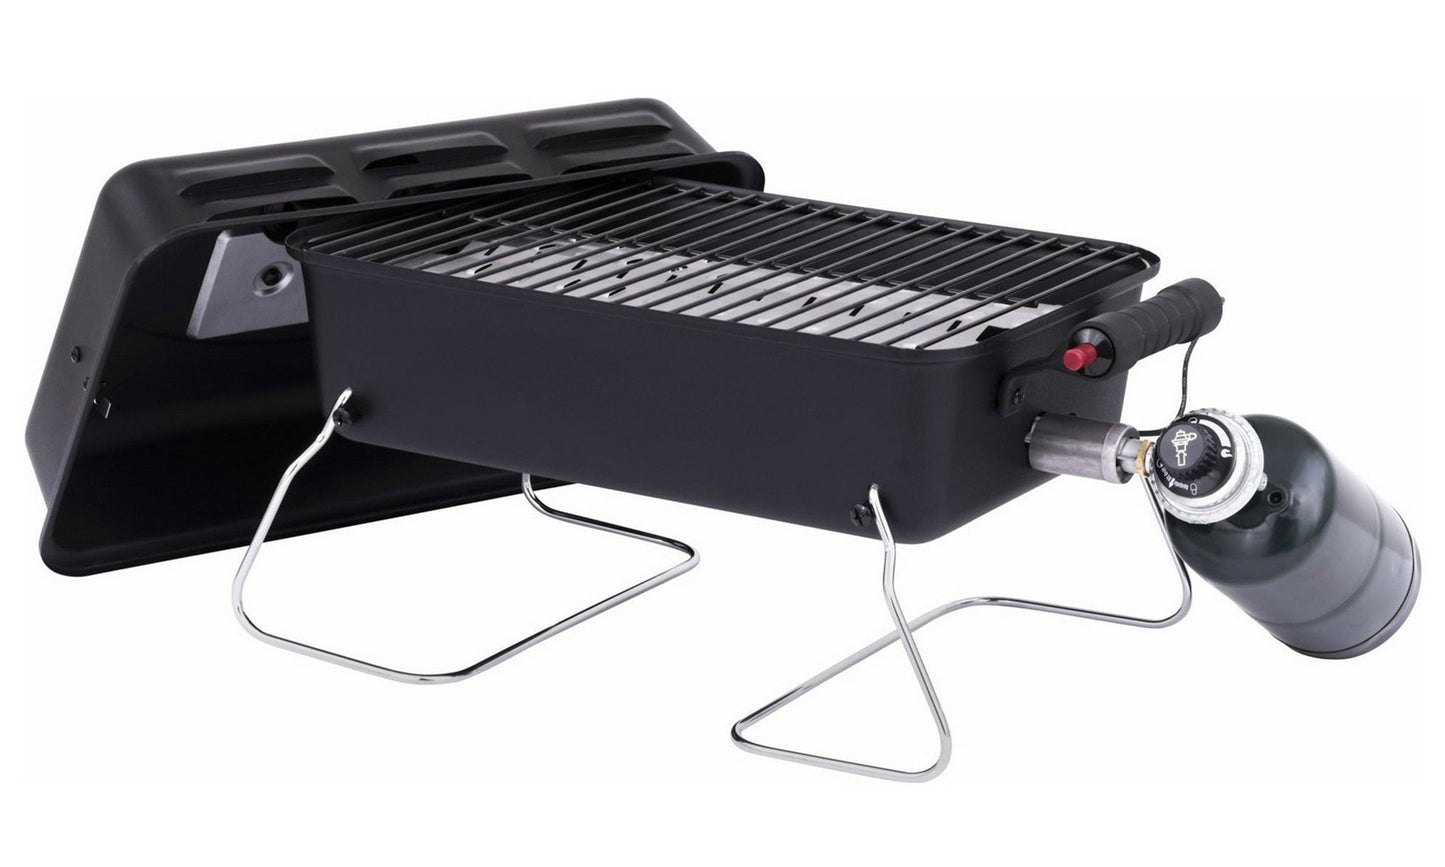 Char-Broil 190 Deluxe Small Portable Tabletop Porcelain Coated Gas Grill